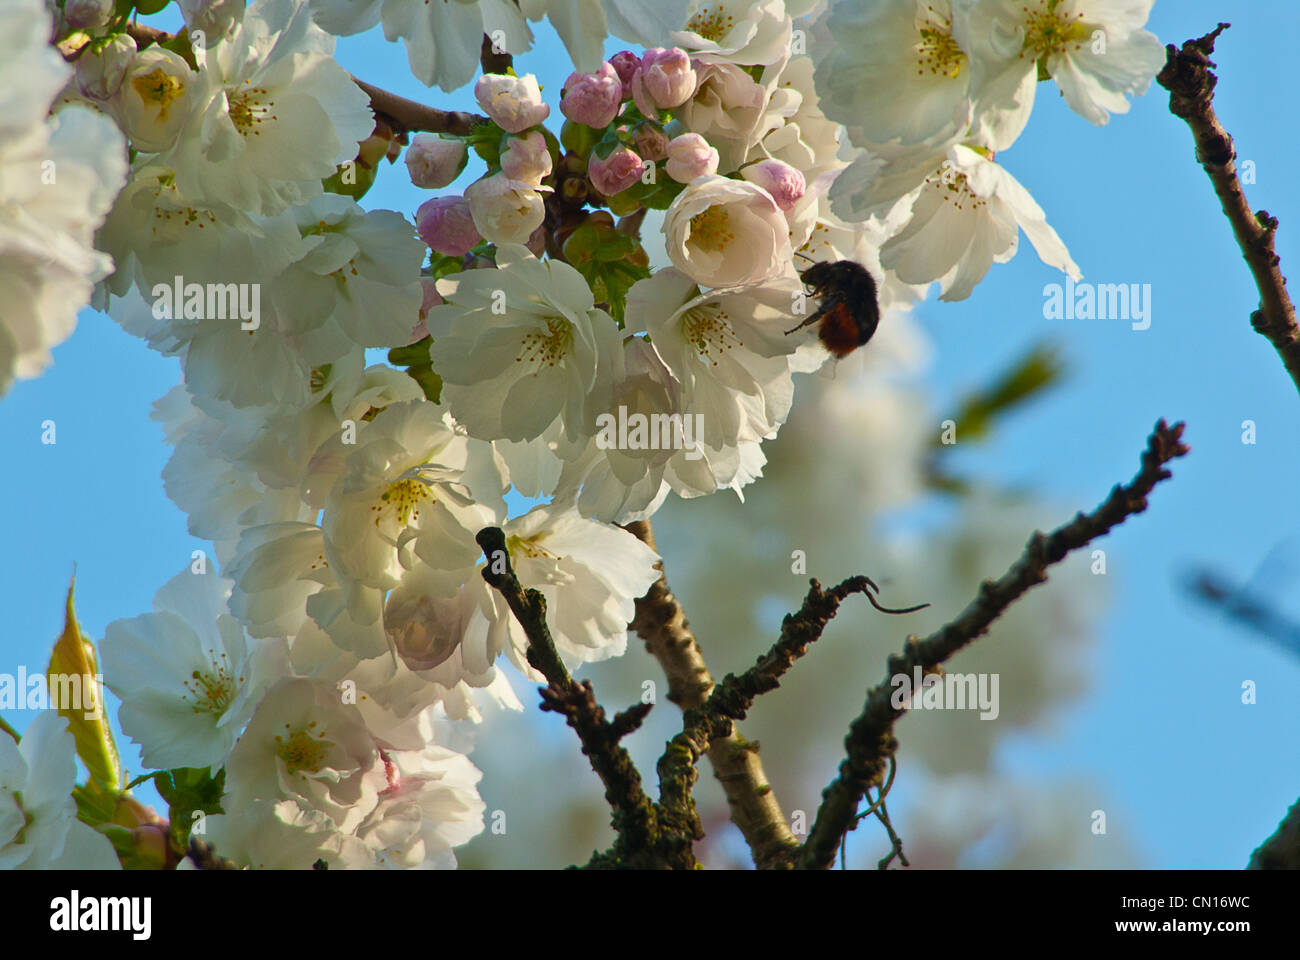 Bumble Bee on spring blossom tree against bright blue sky Stock Photo